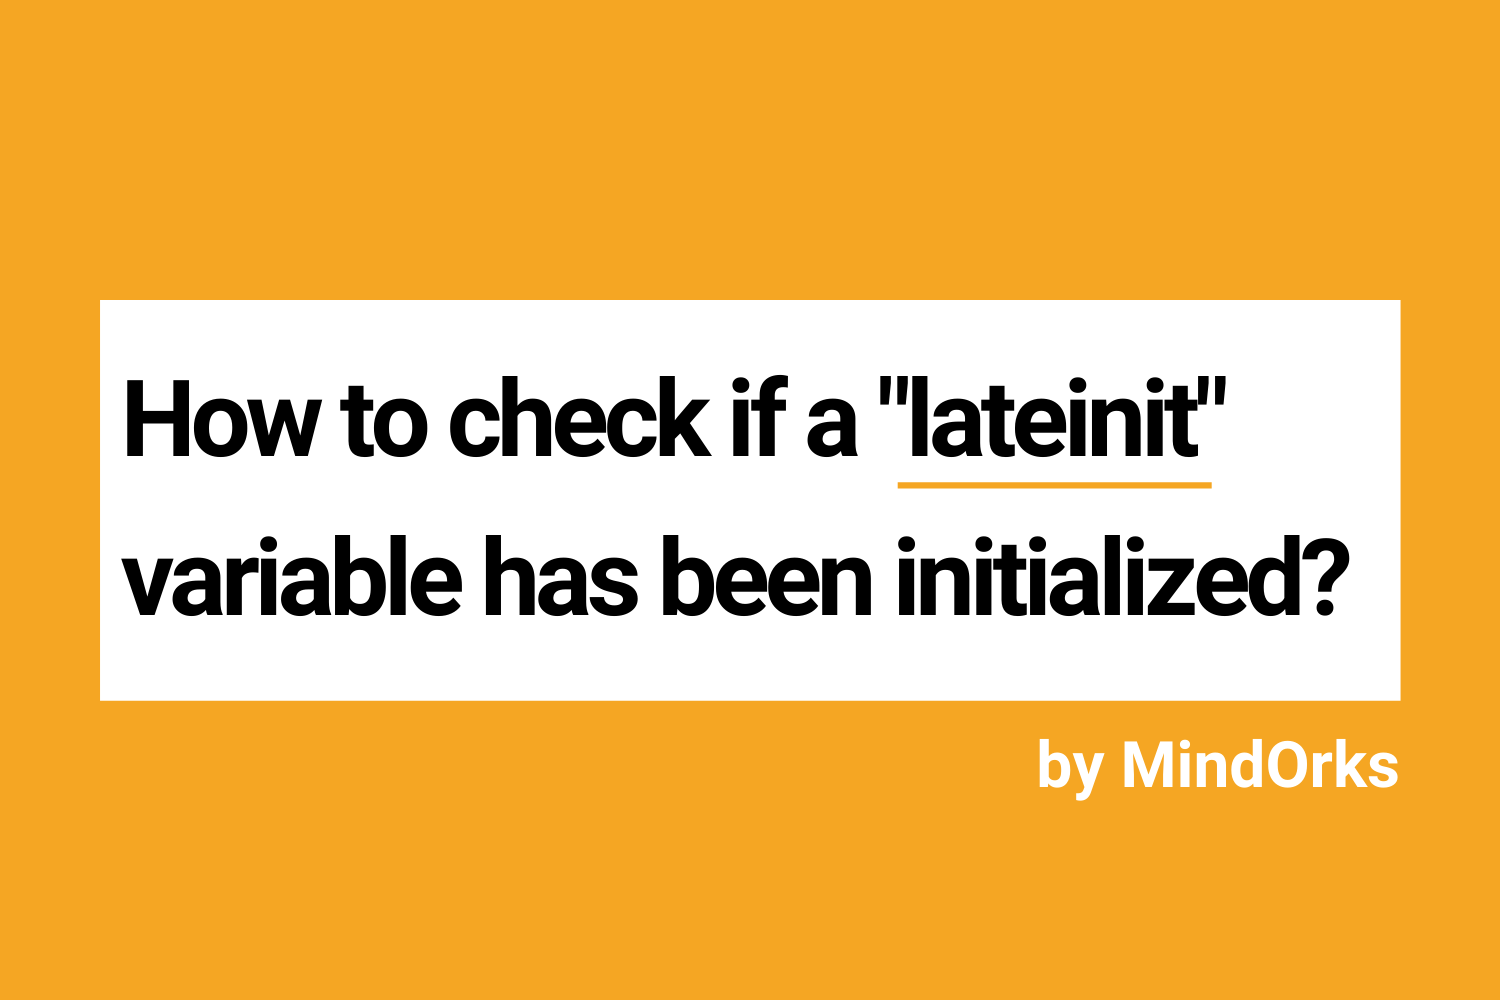 How to check if a lateinit variable has been initialized?